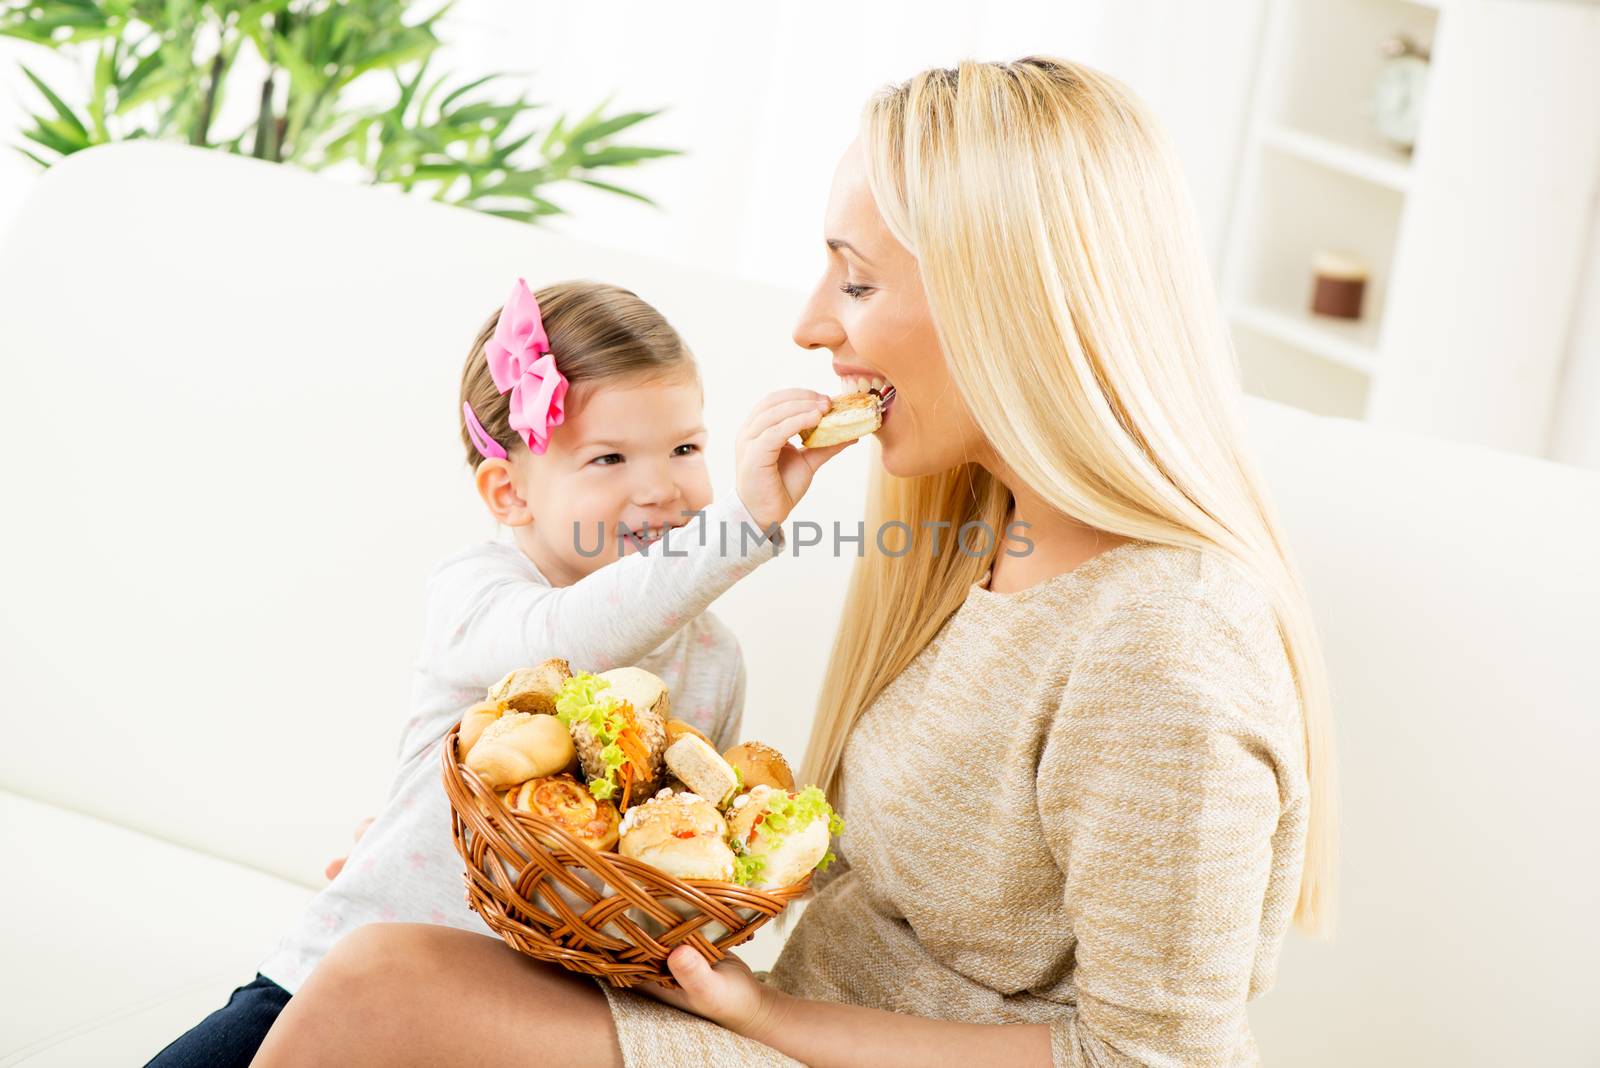 Cute Mom And Daughter With Pastries by MilanMarkovic78